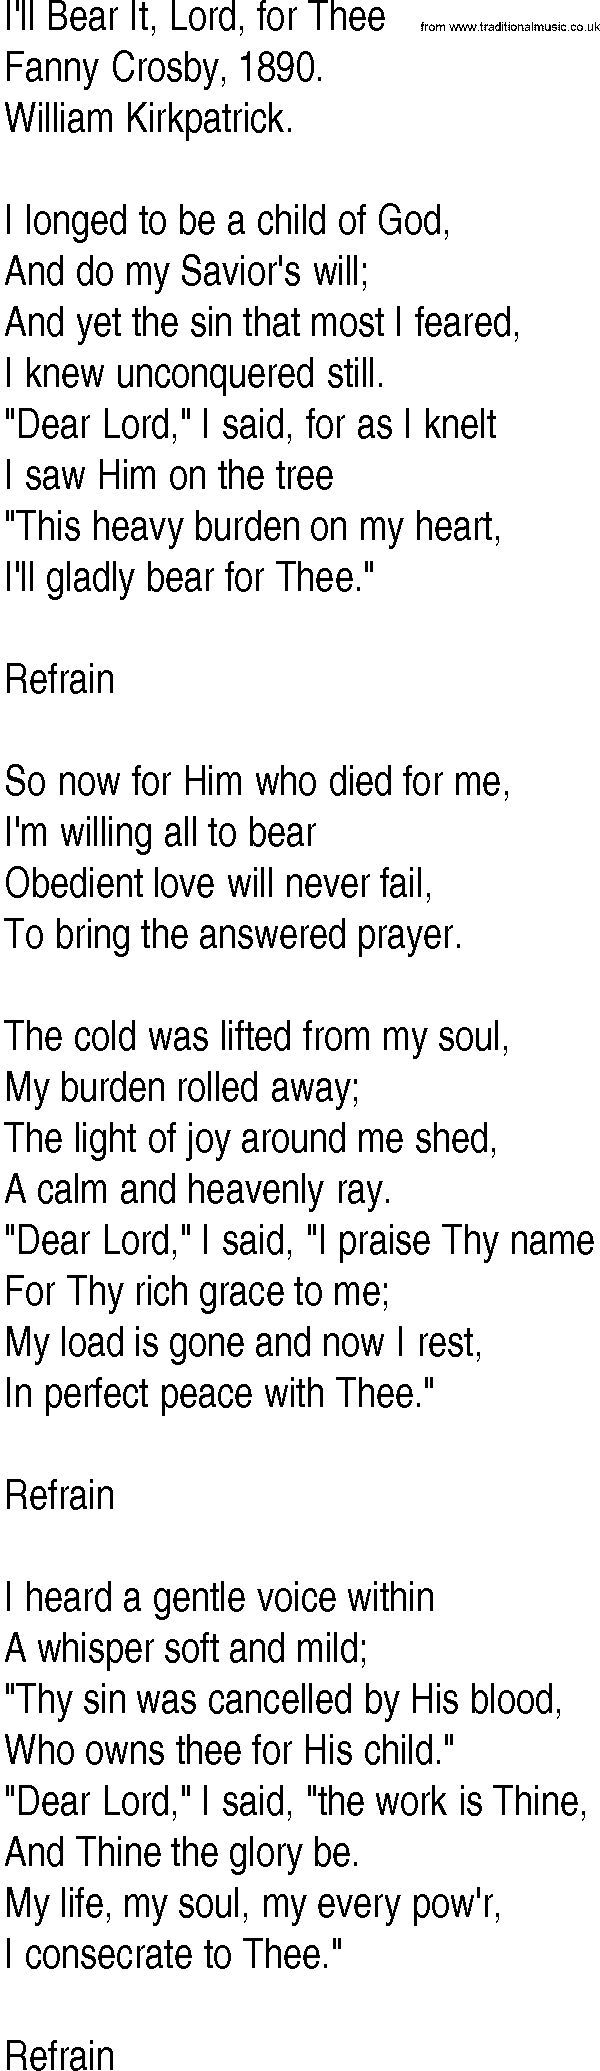 Hymn and Gospel Song: I'll Bear It, Lord, for Thee by Fanny Crosby lyrics